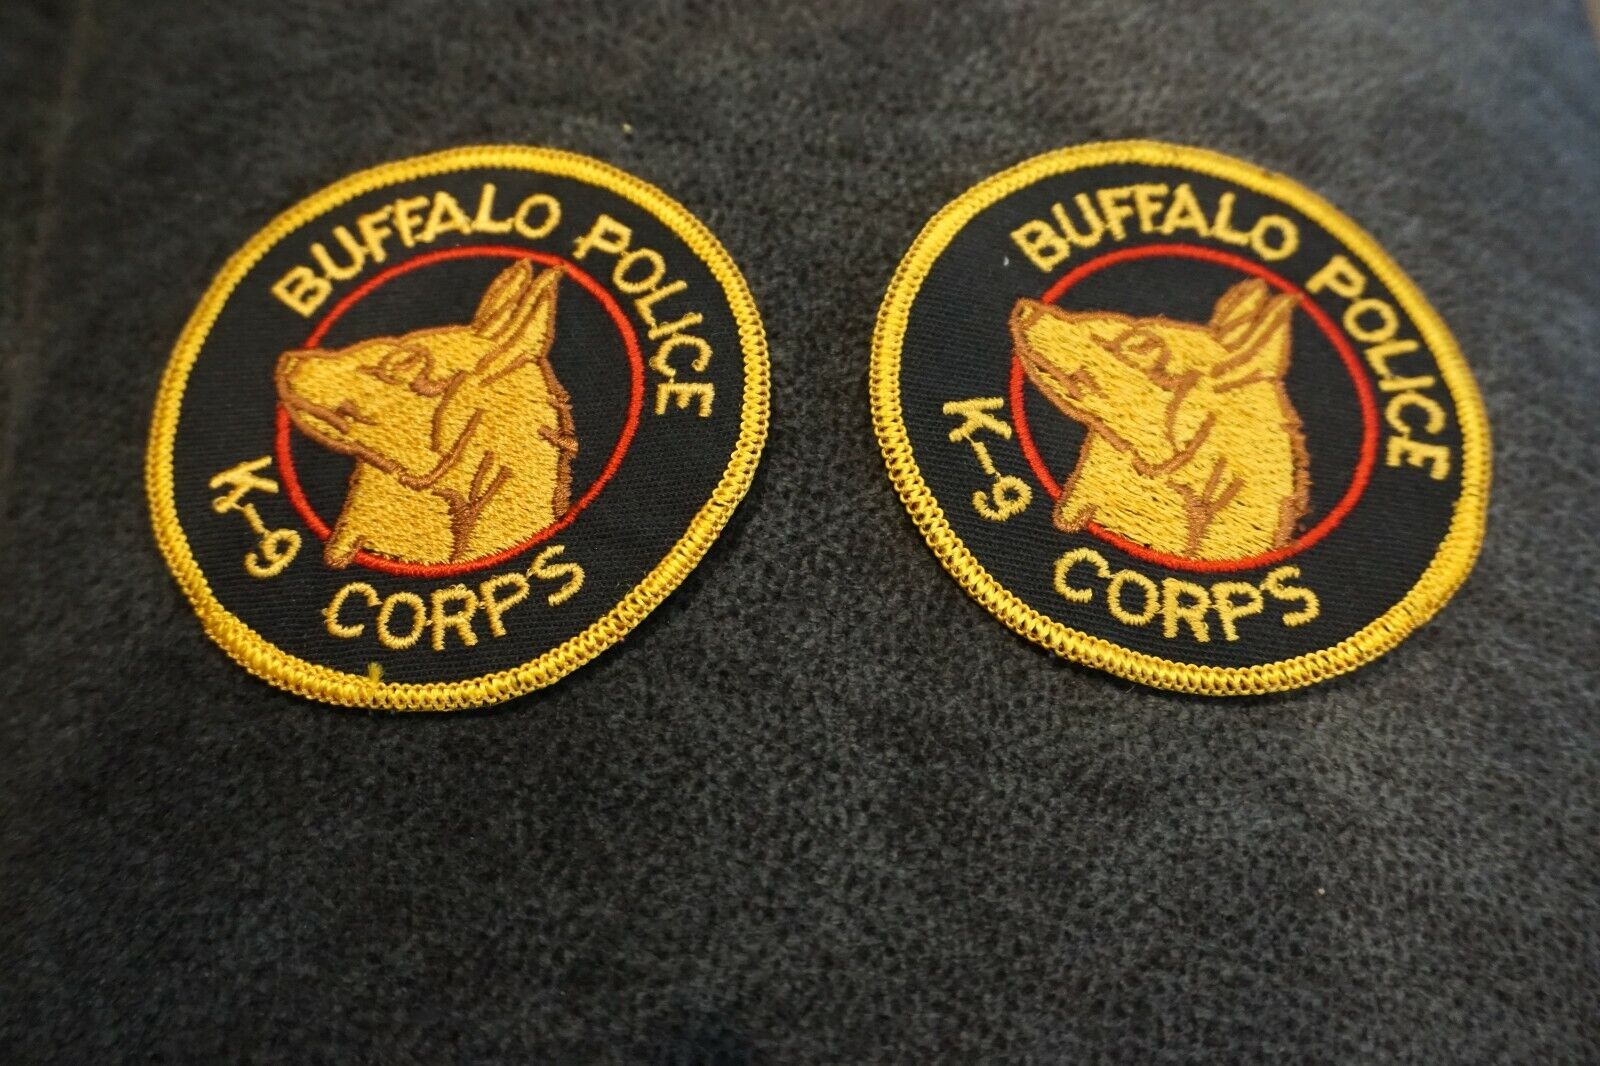 Buffalo New York Police Department (BPD) k-9 corps patch